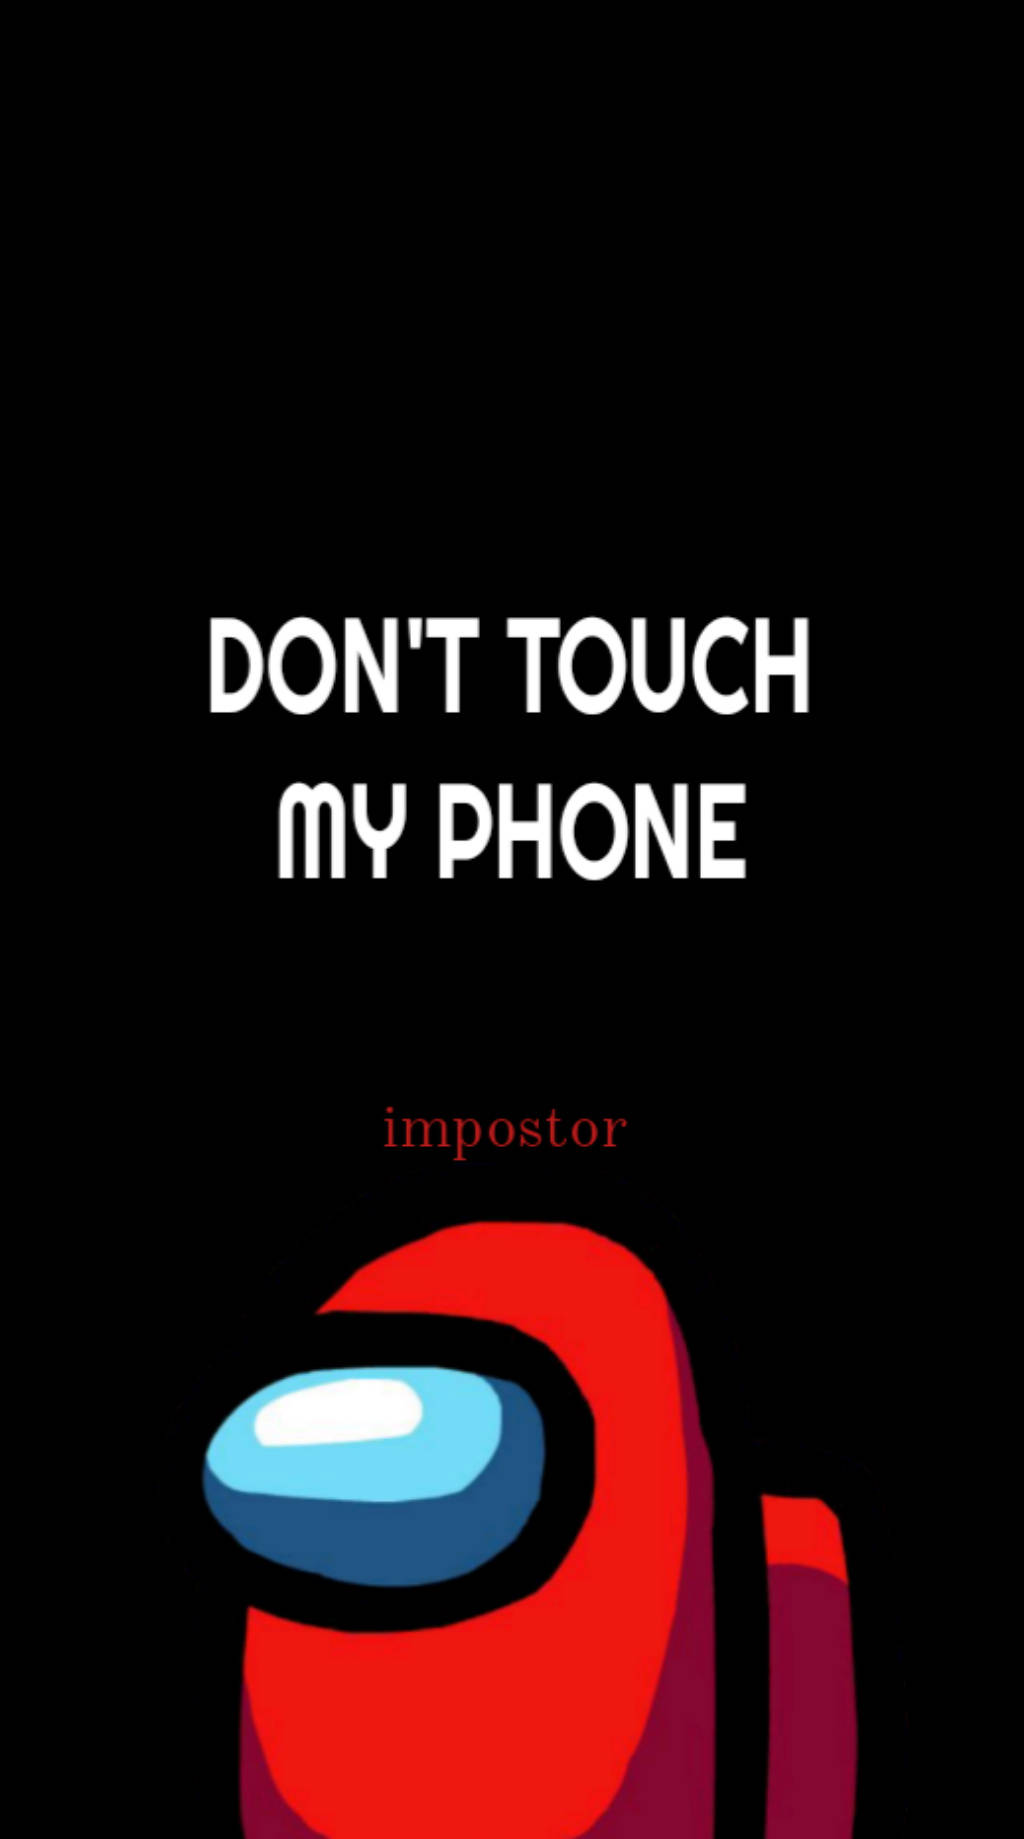 Cool Among Us Don't Touch Phone